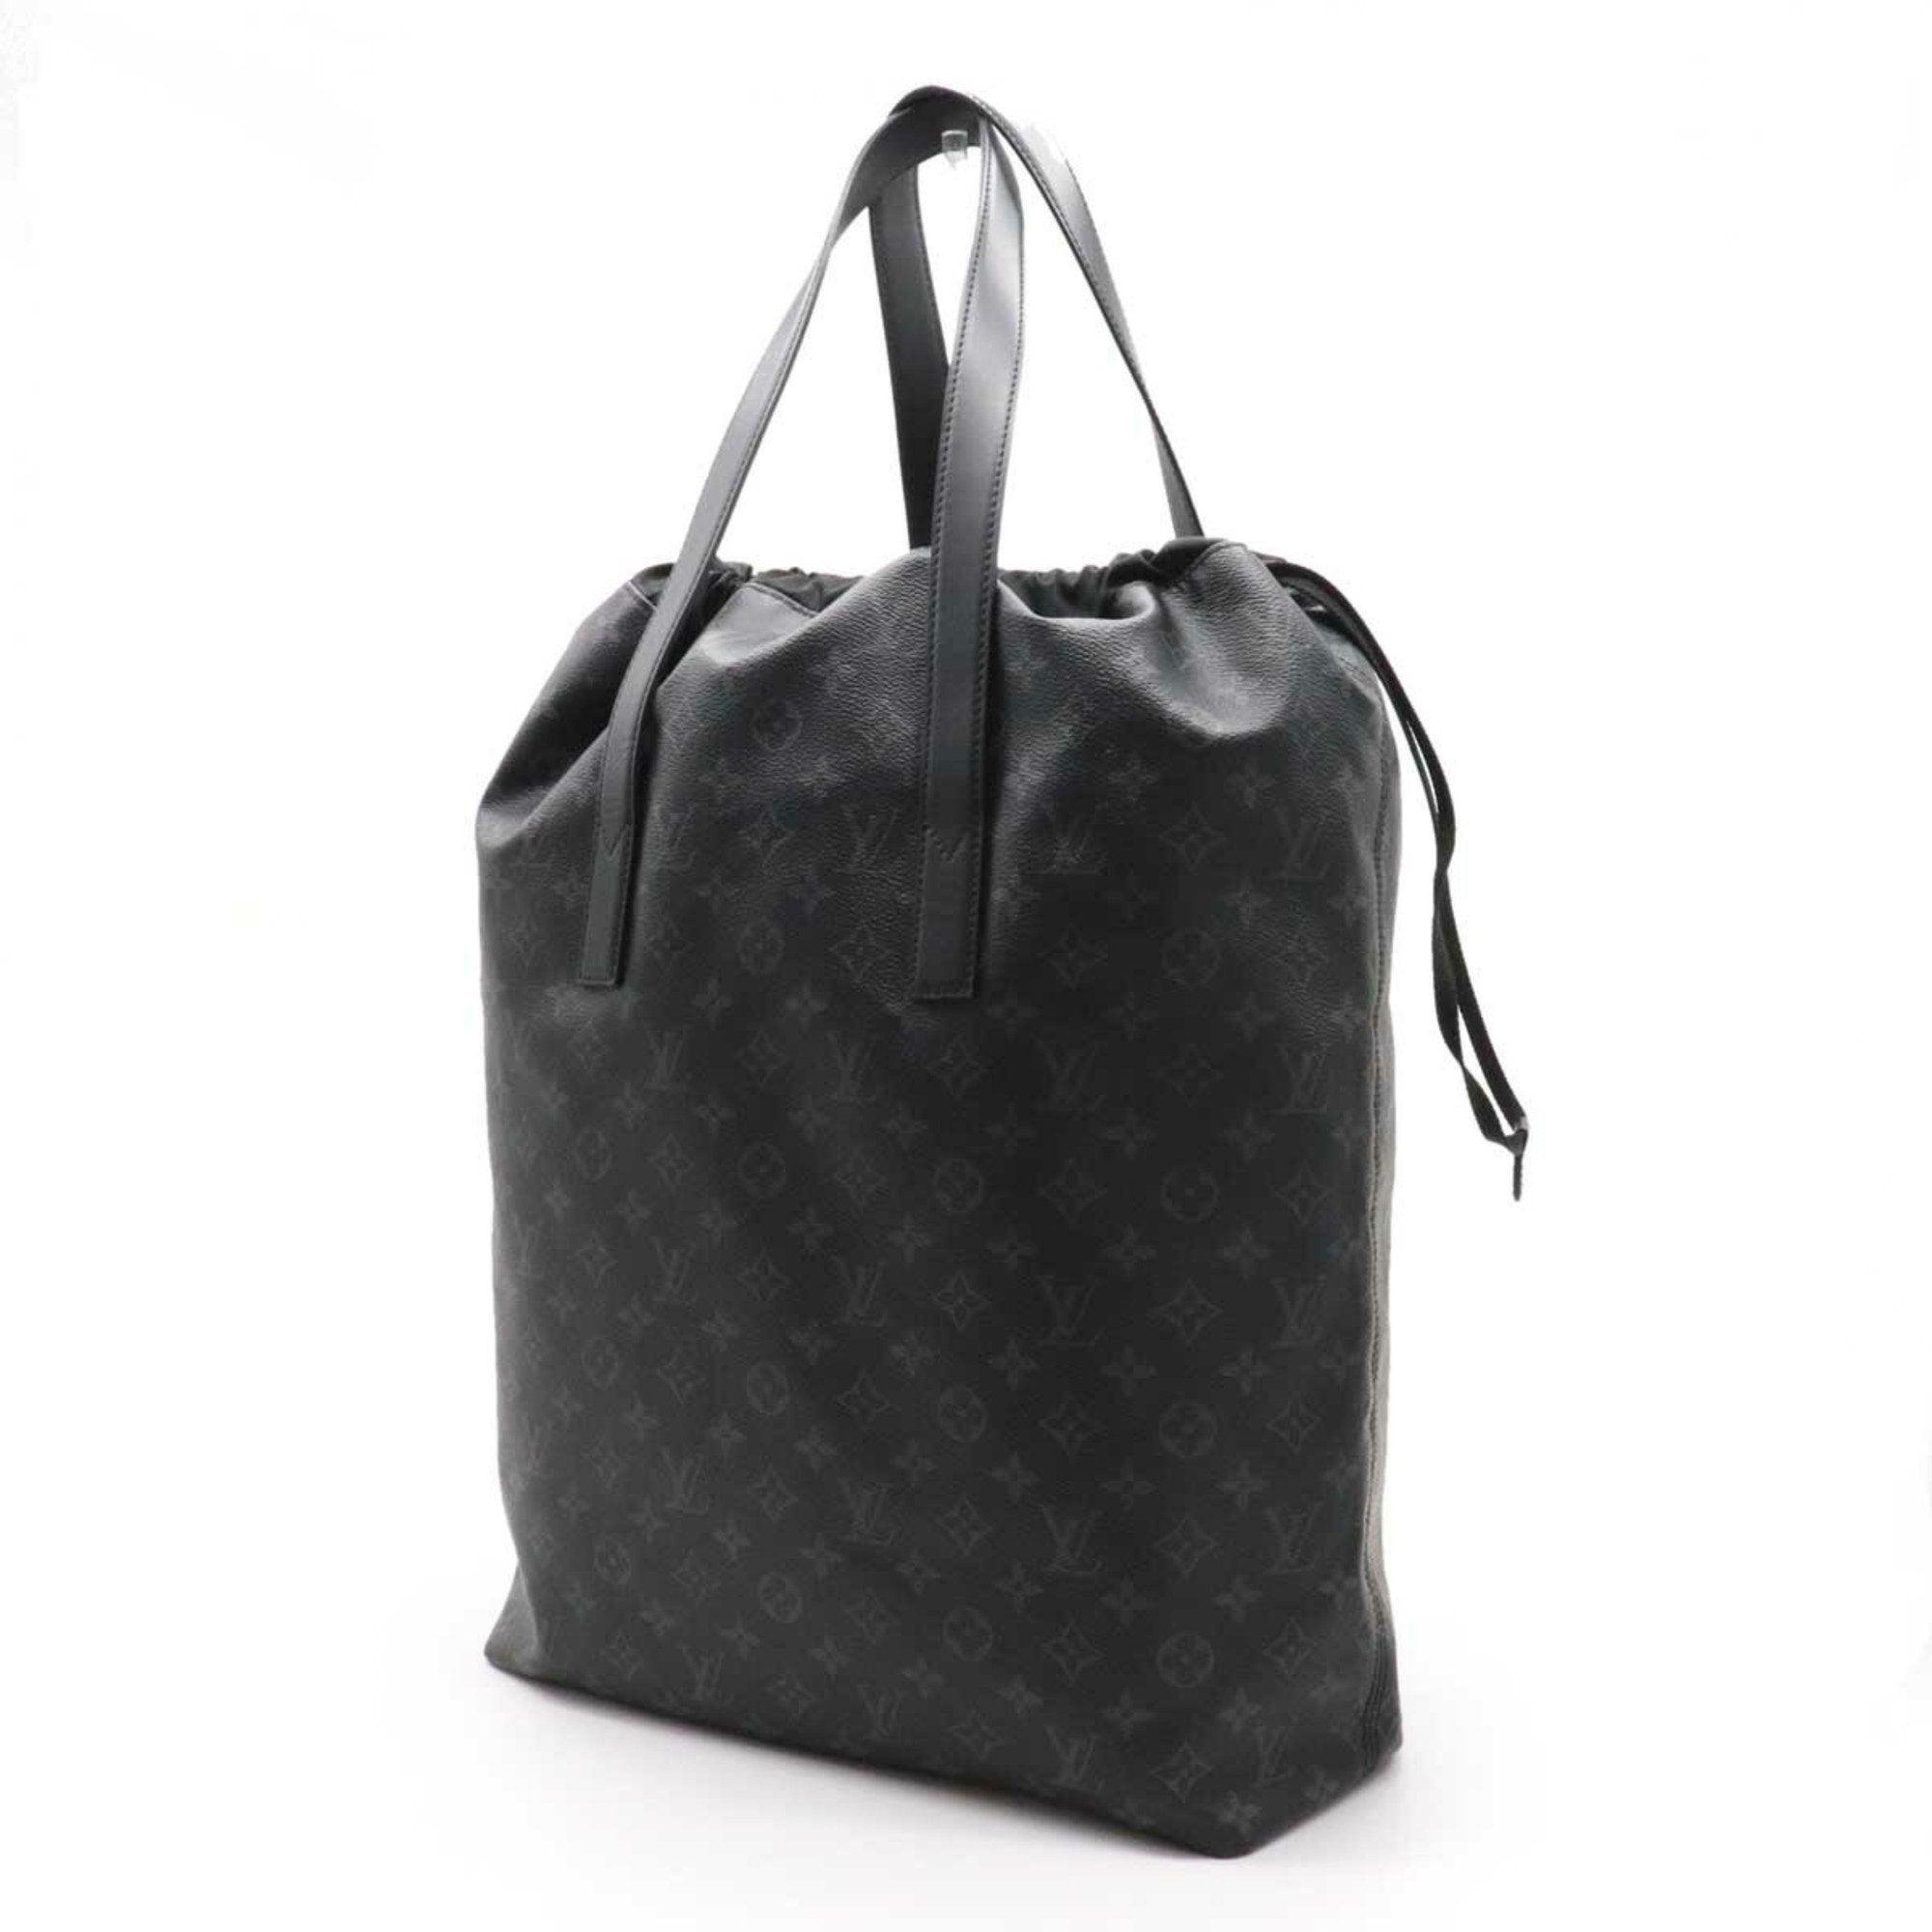 Louis Vuitton White Canvas Tote Bag (Pre-Owned)